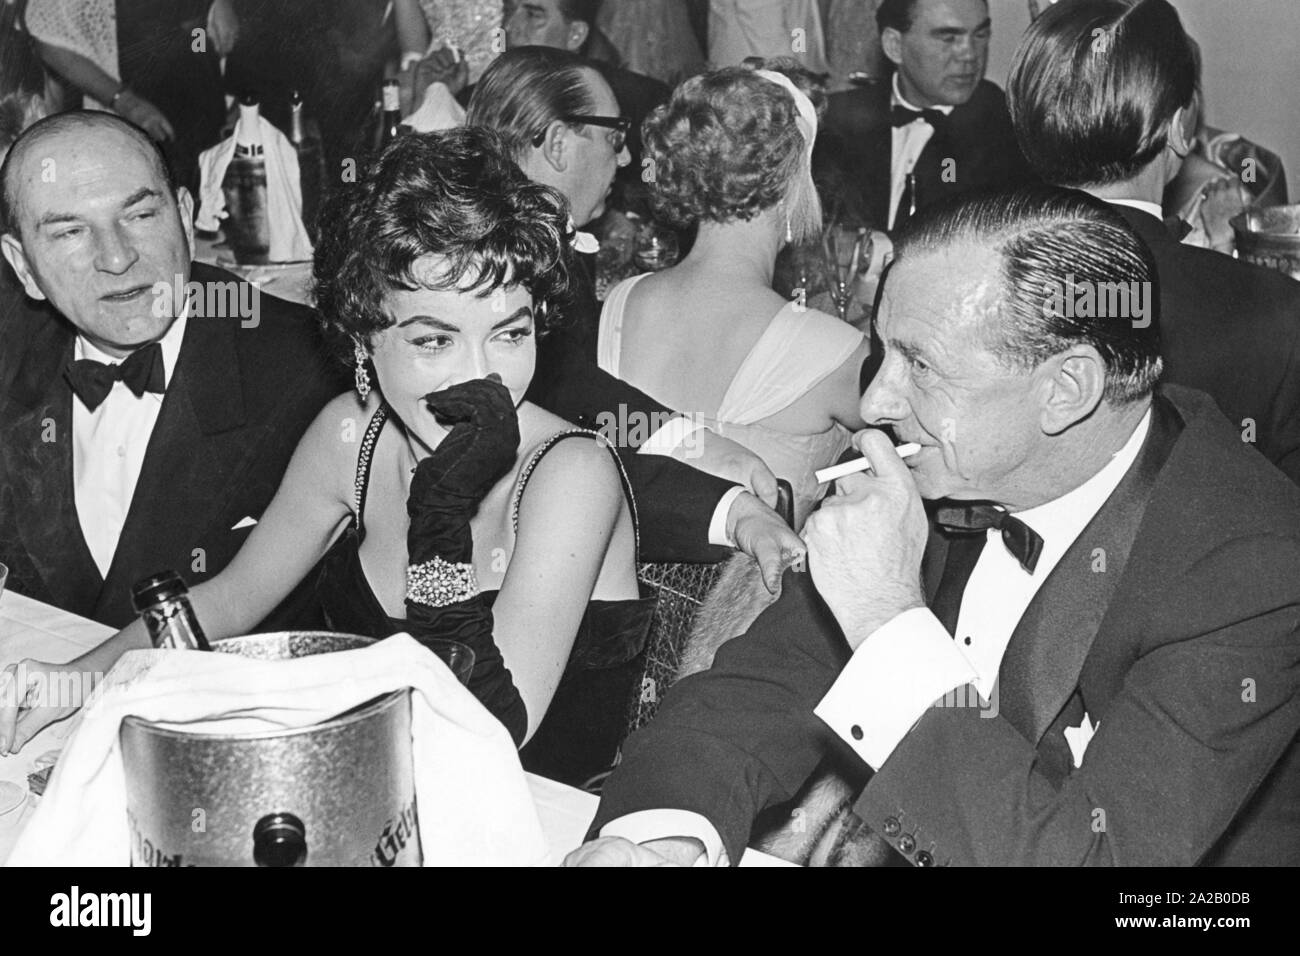 The journalist Georg Salmony and the actress Mara Lane in conversation with the rich industrialist Nuss. In the background the boxer Max Schmeling can be seen. Stock Photo